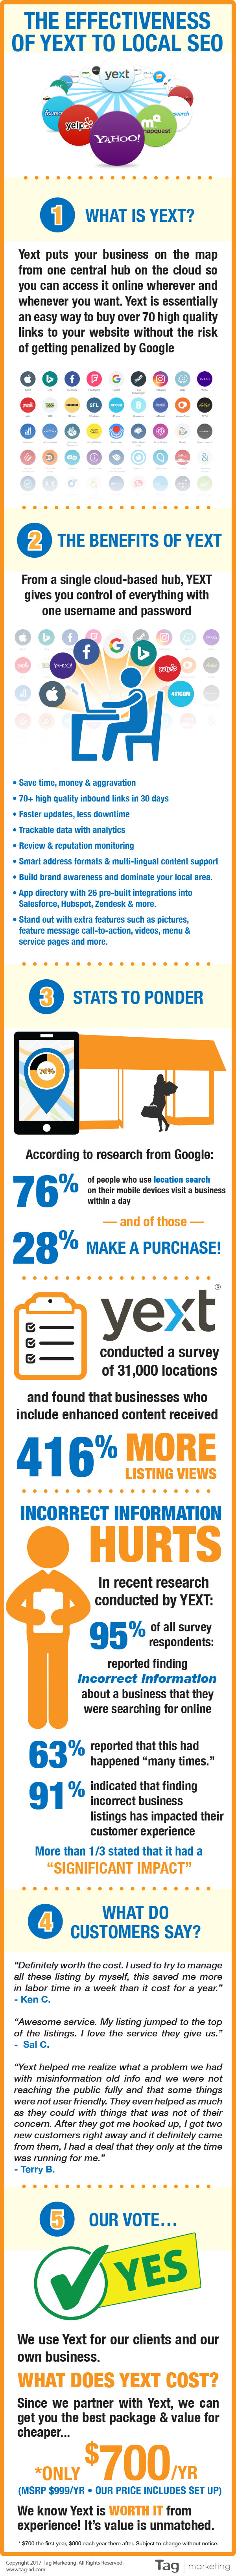 How Effective Is Yext for Local SEO Campaigns {Infographic}